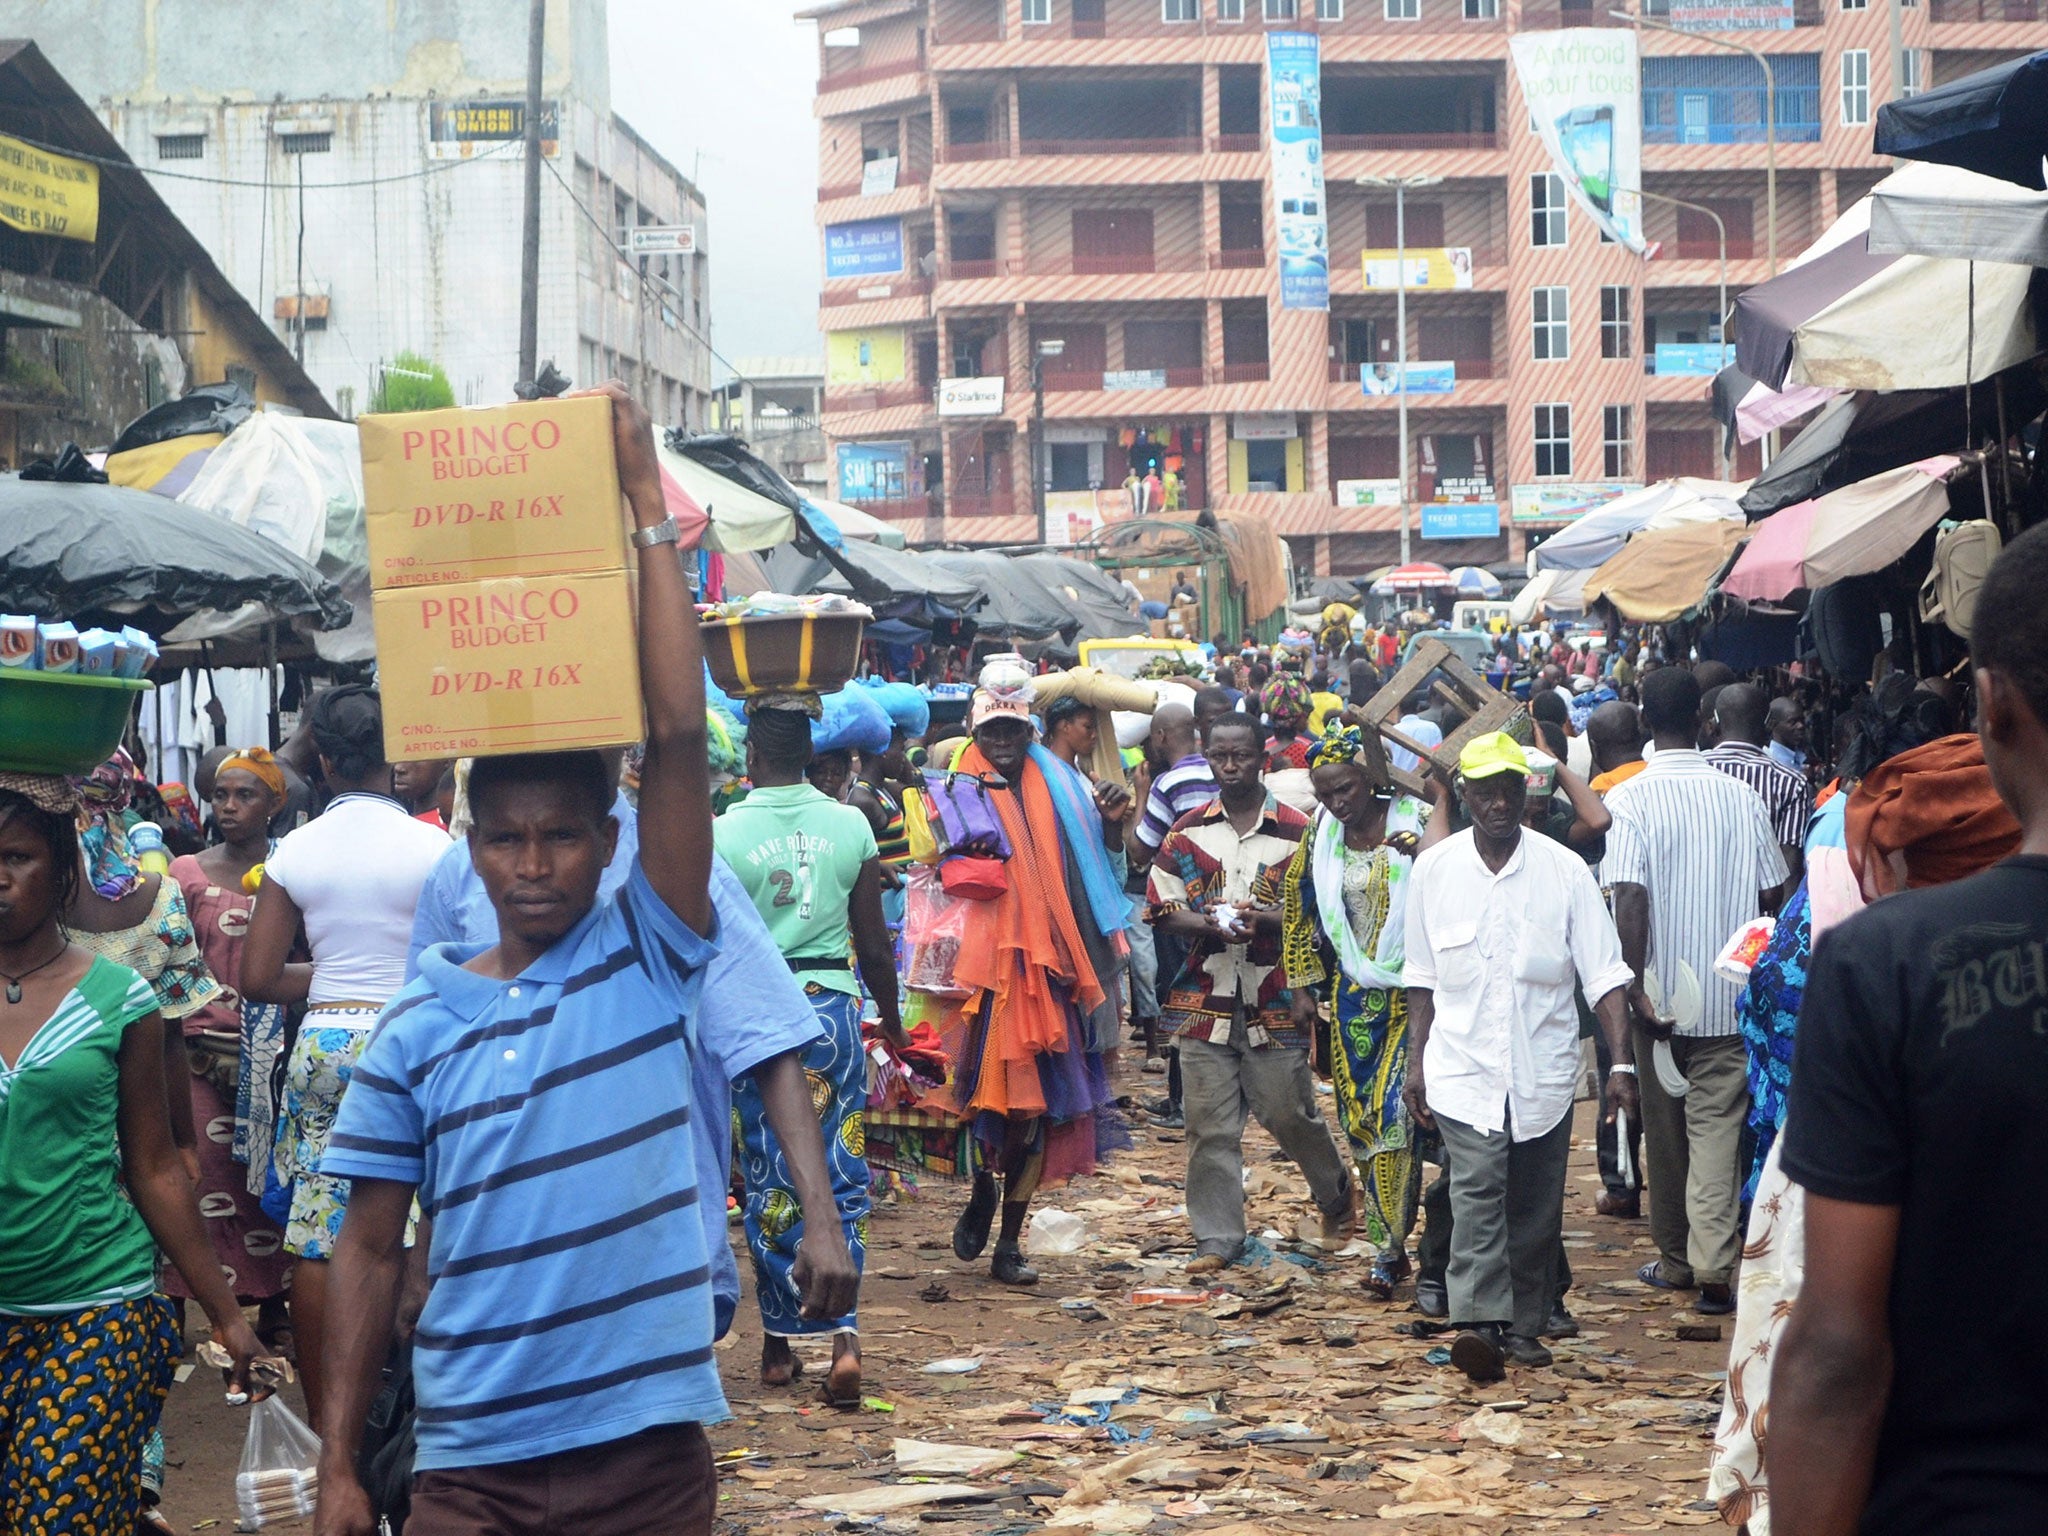 People walking in a street in the capital of Guinea, Conakry. The Presidency has declared a week of mourning after 24 people were killed in a stampede at a concert in the Ratoma neighbourhood of the city, held to celebrate the end of Ramadan